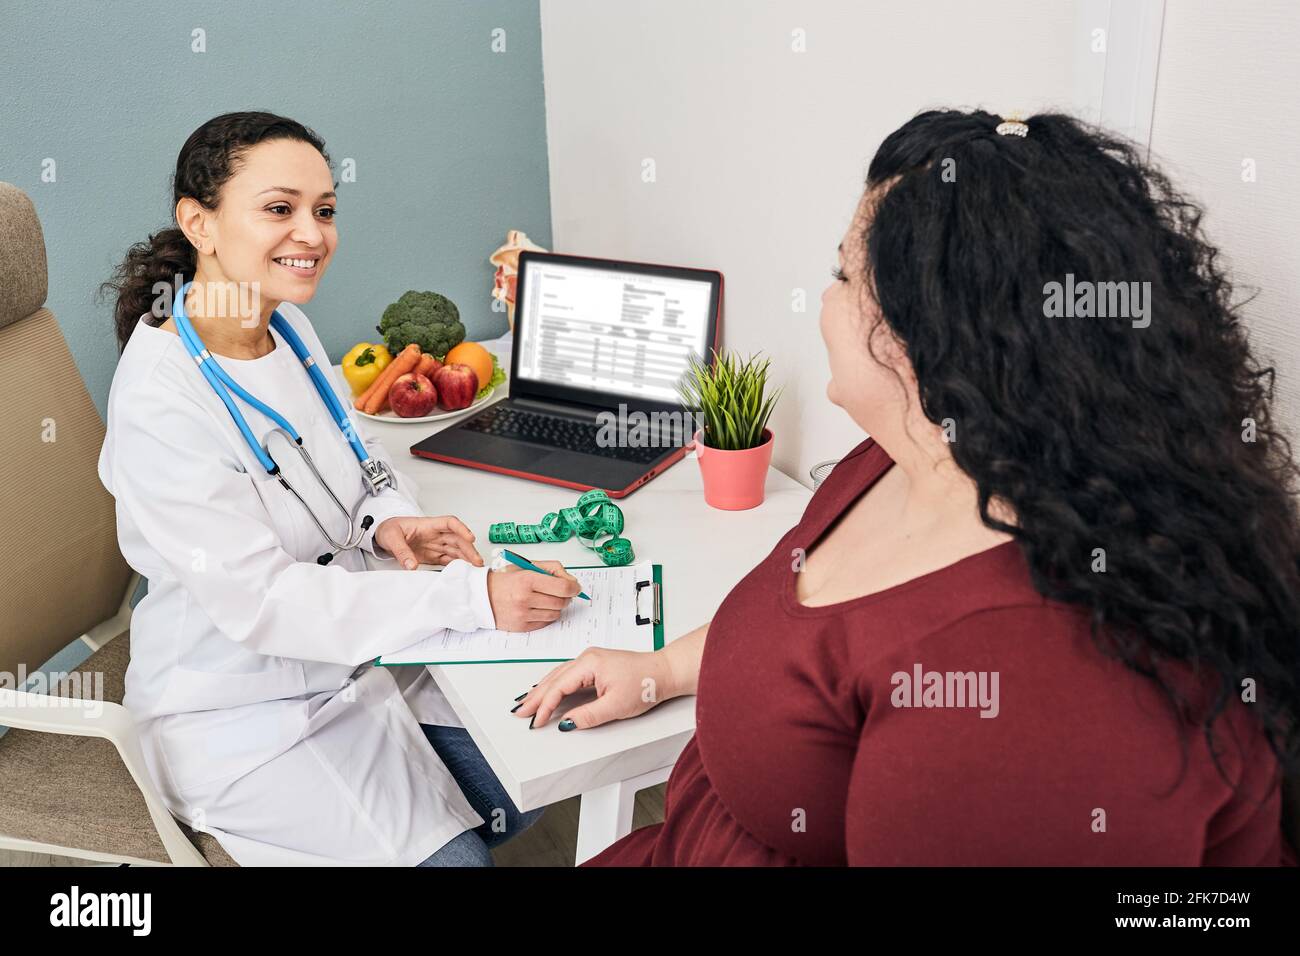 Nutritionist consultation. Dietitian plans meal plan for a female obese patient Stock Photo